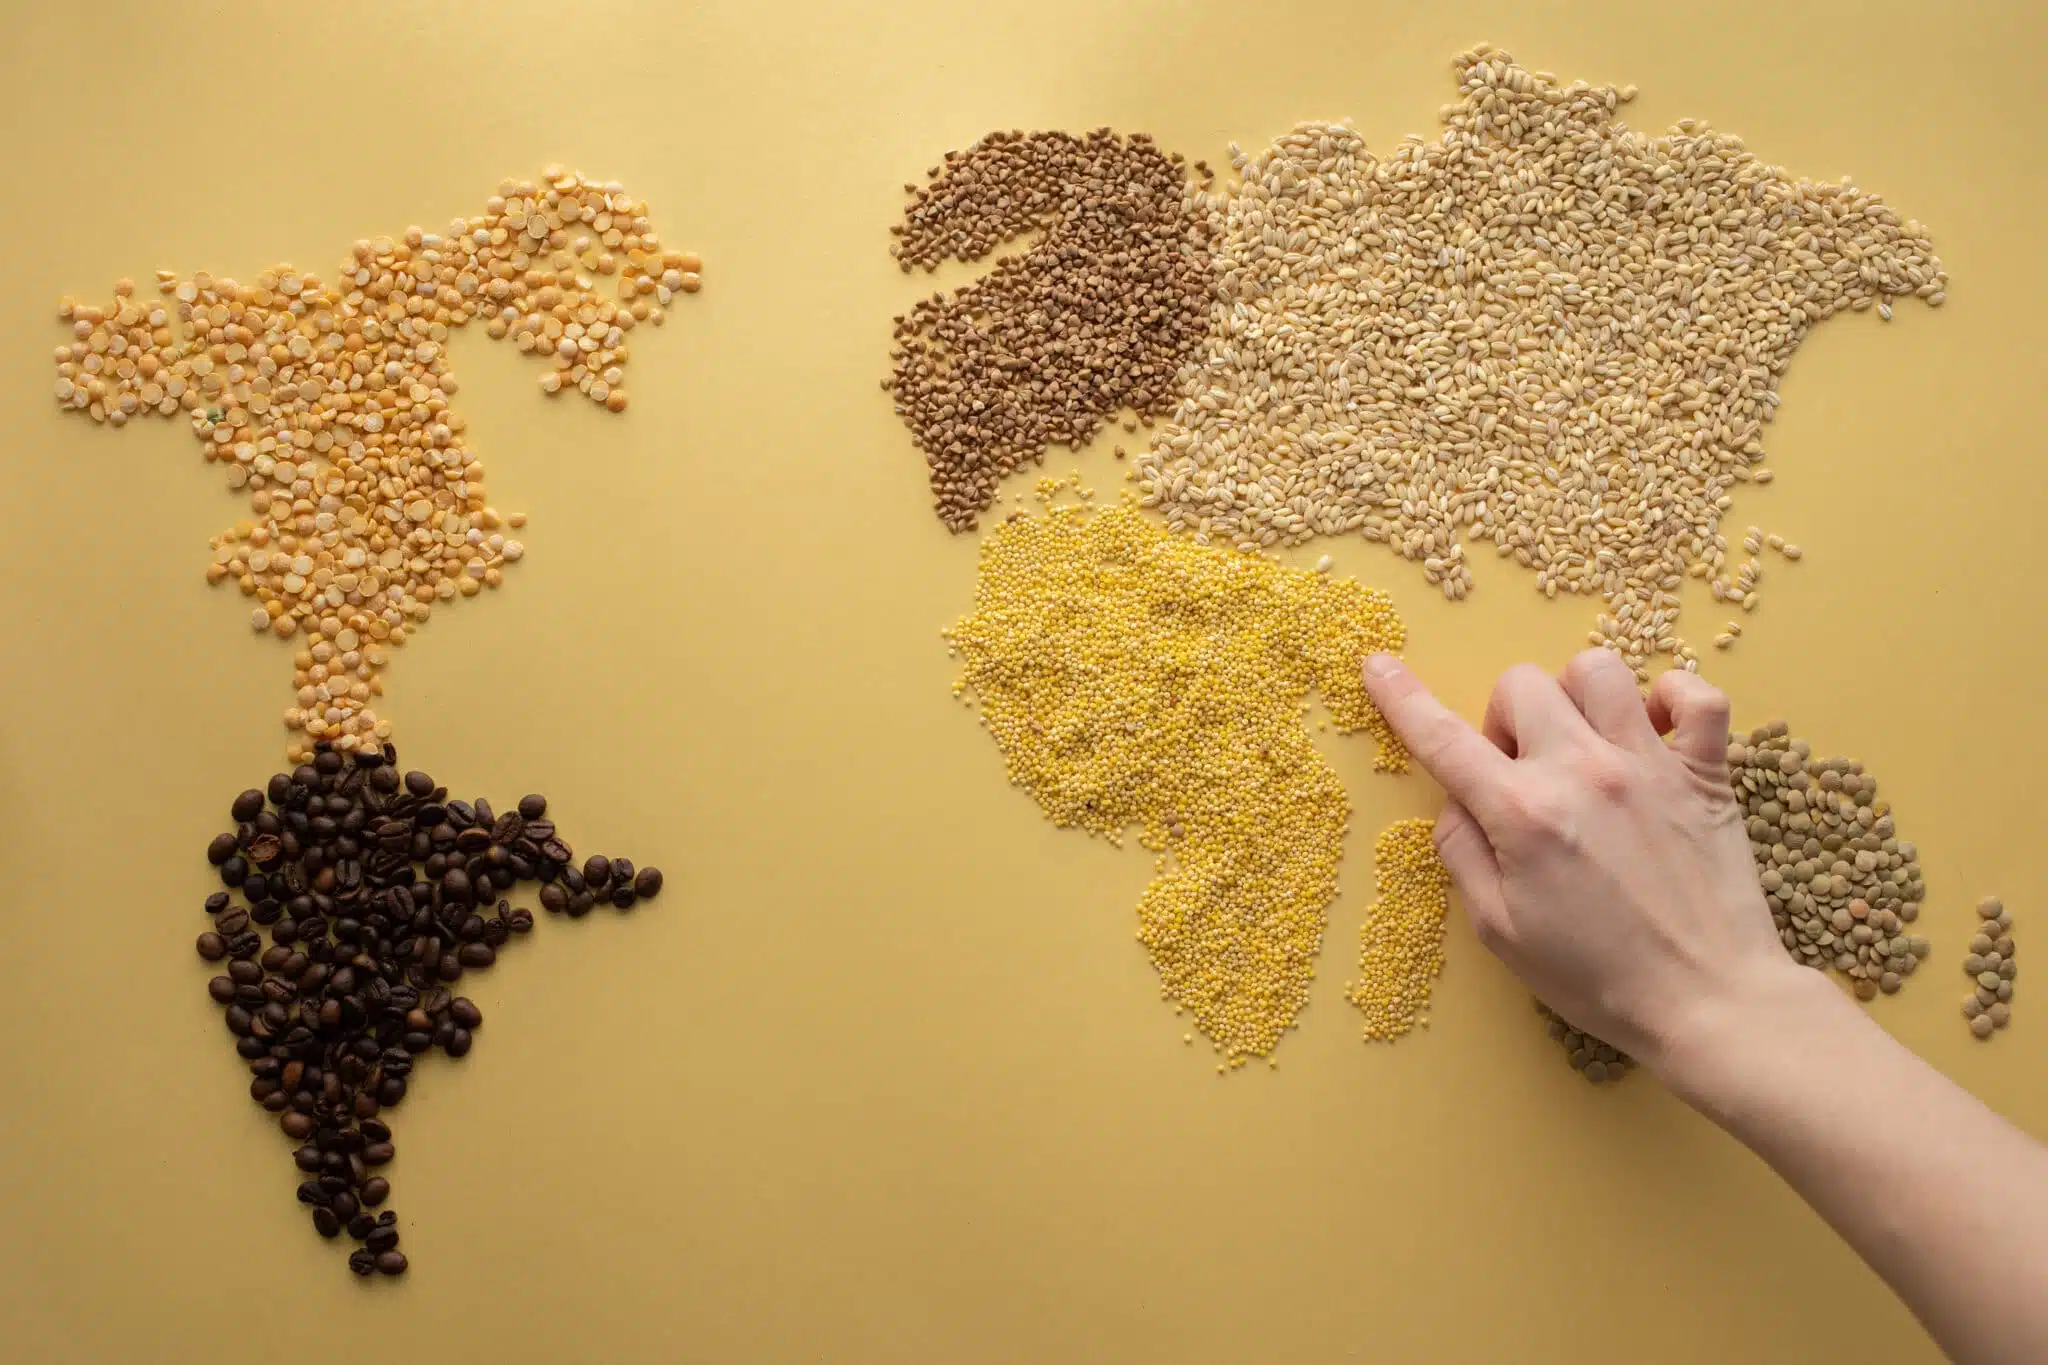 An anonymous person making world map with cereals and coffee beans